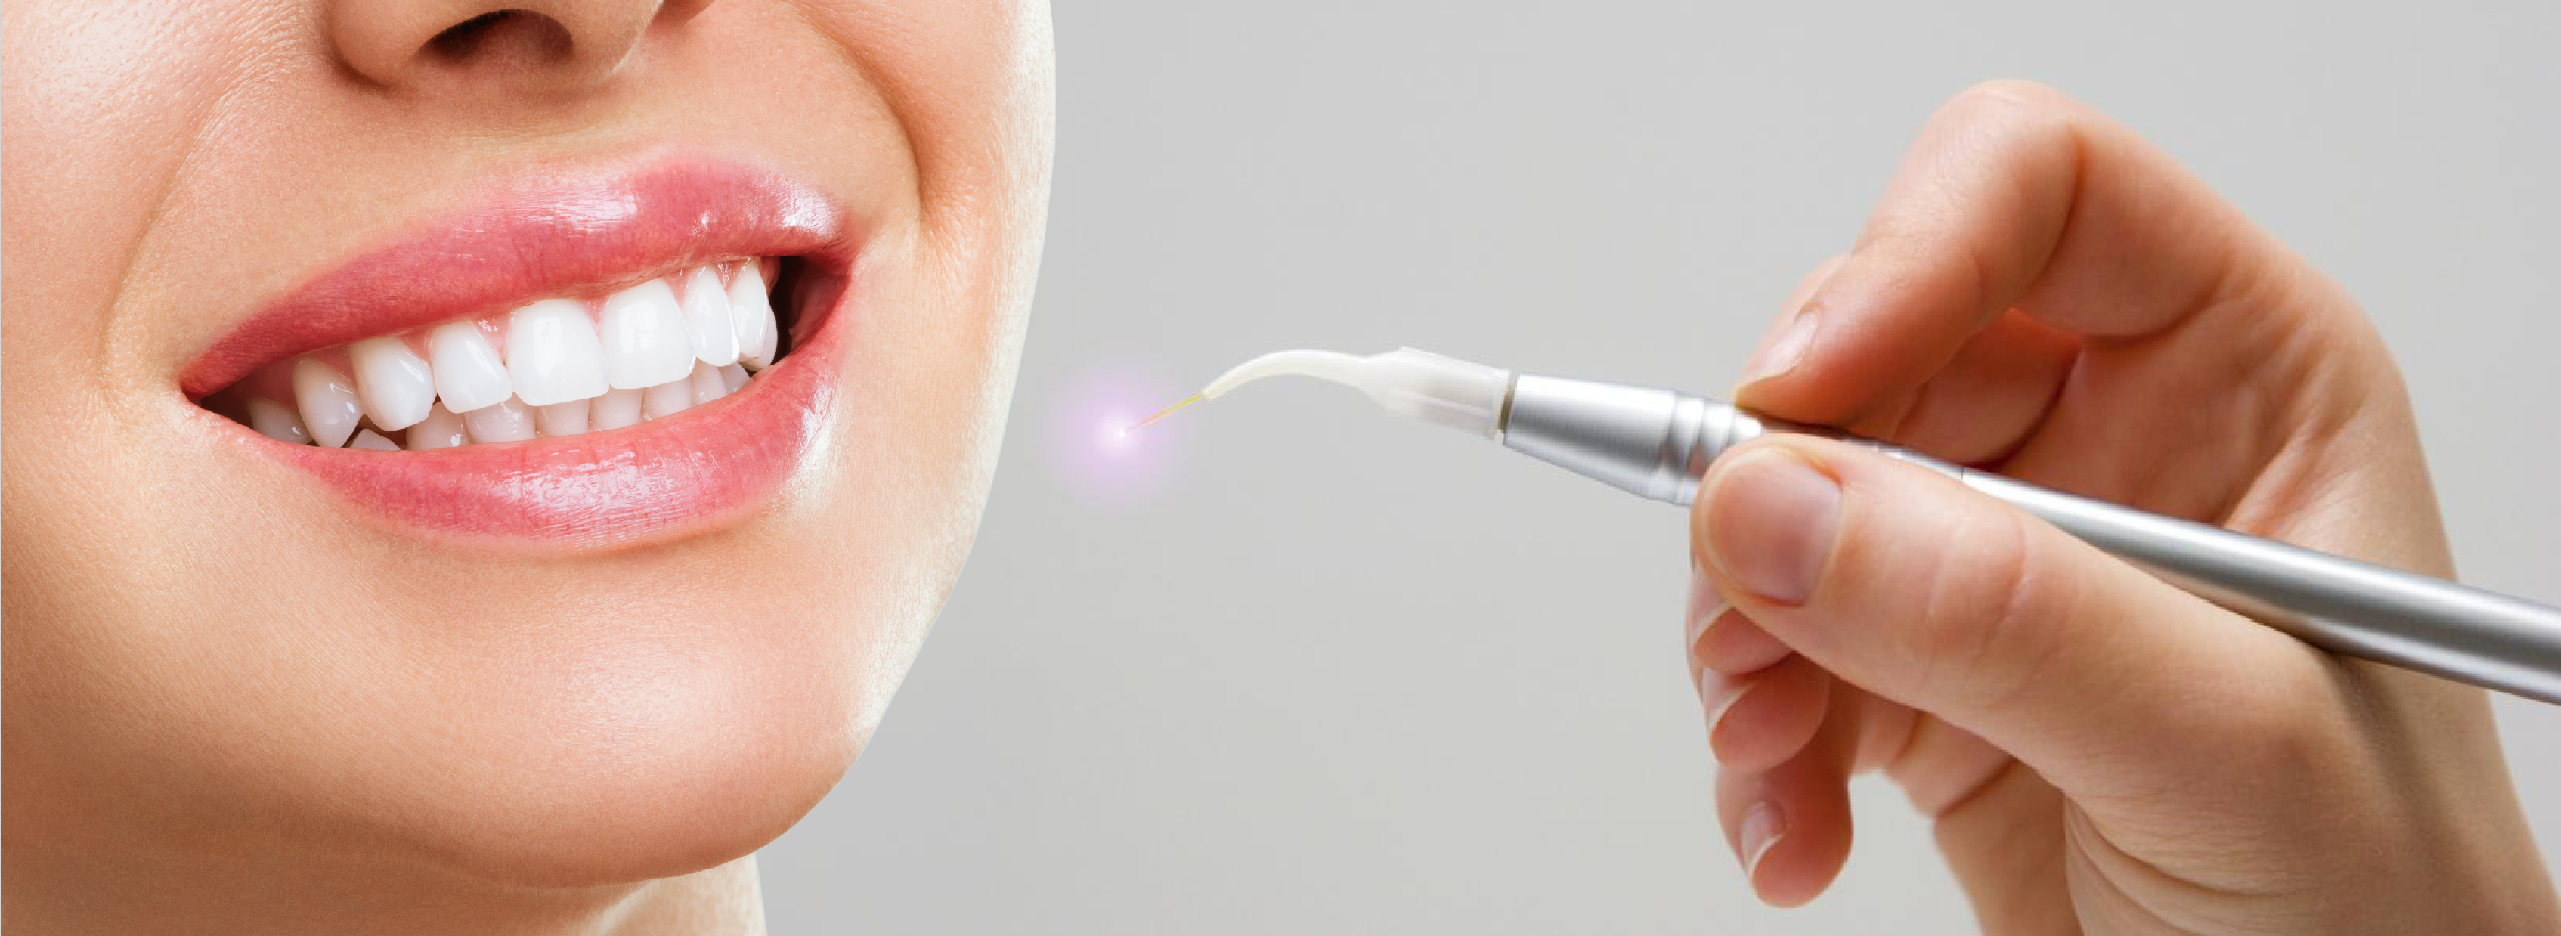 Dental laser-perfect-health-teeth-smile-young-woman-teeth-whitening with laser technology- tanger dental center